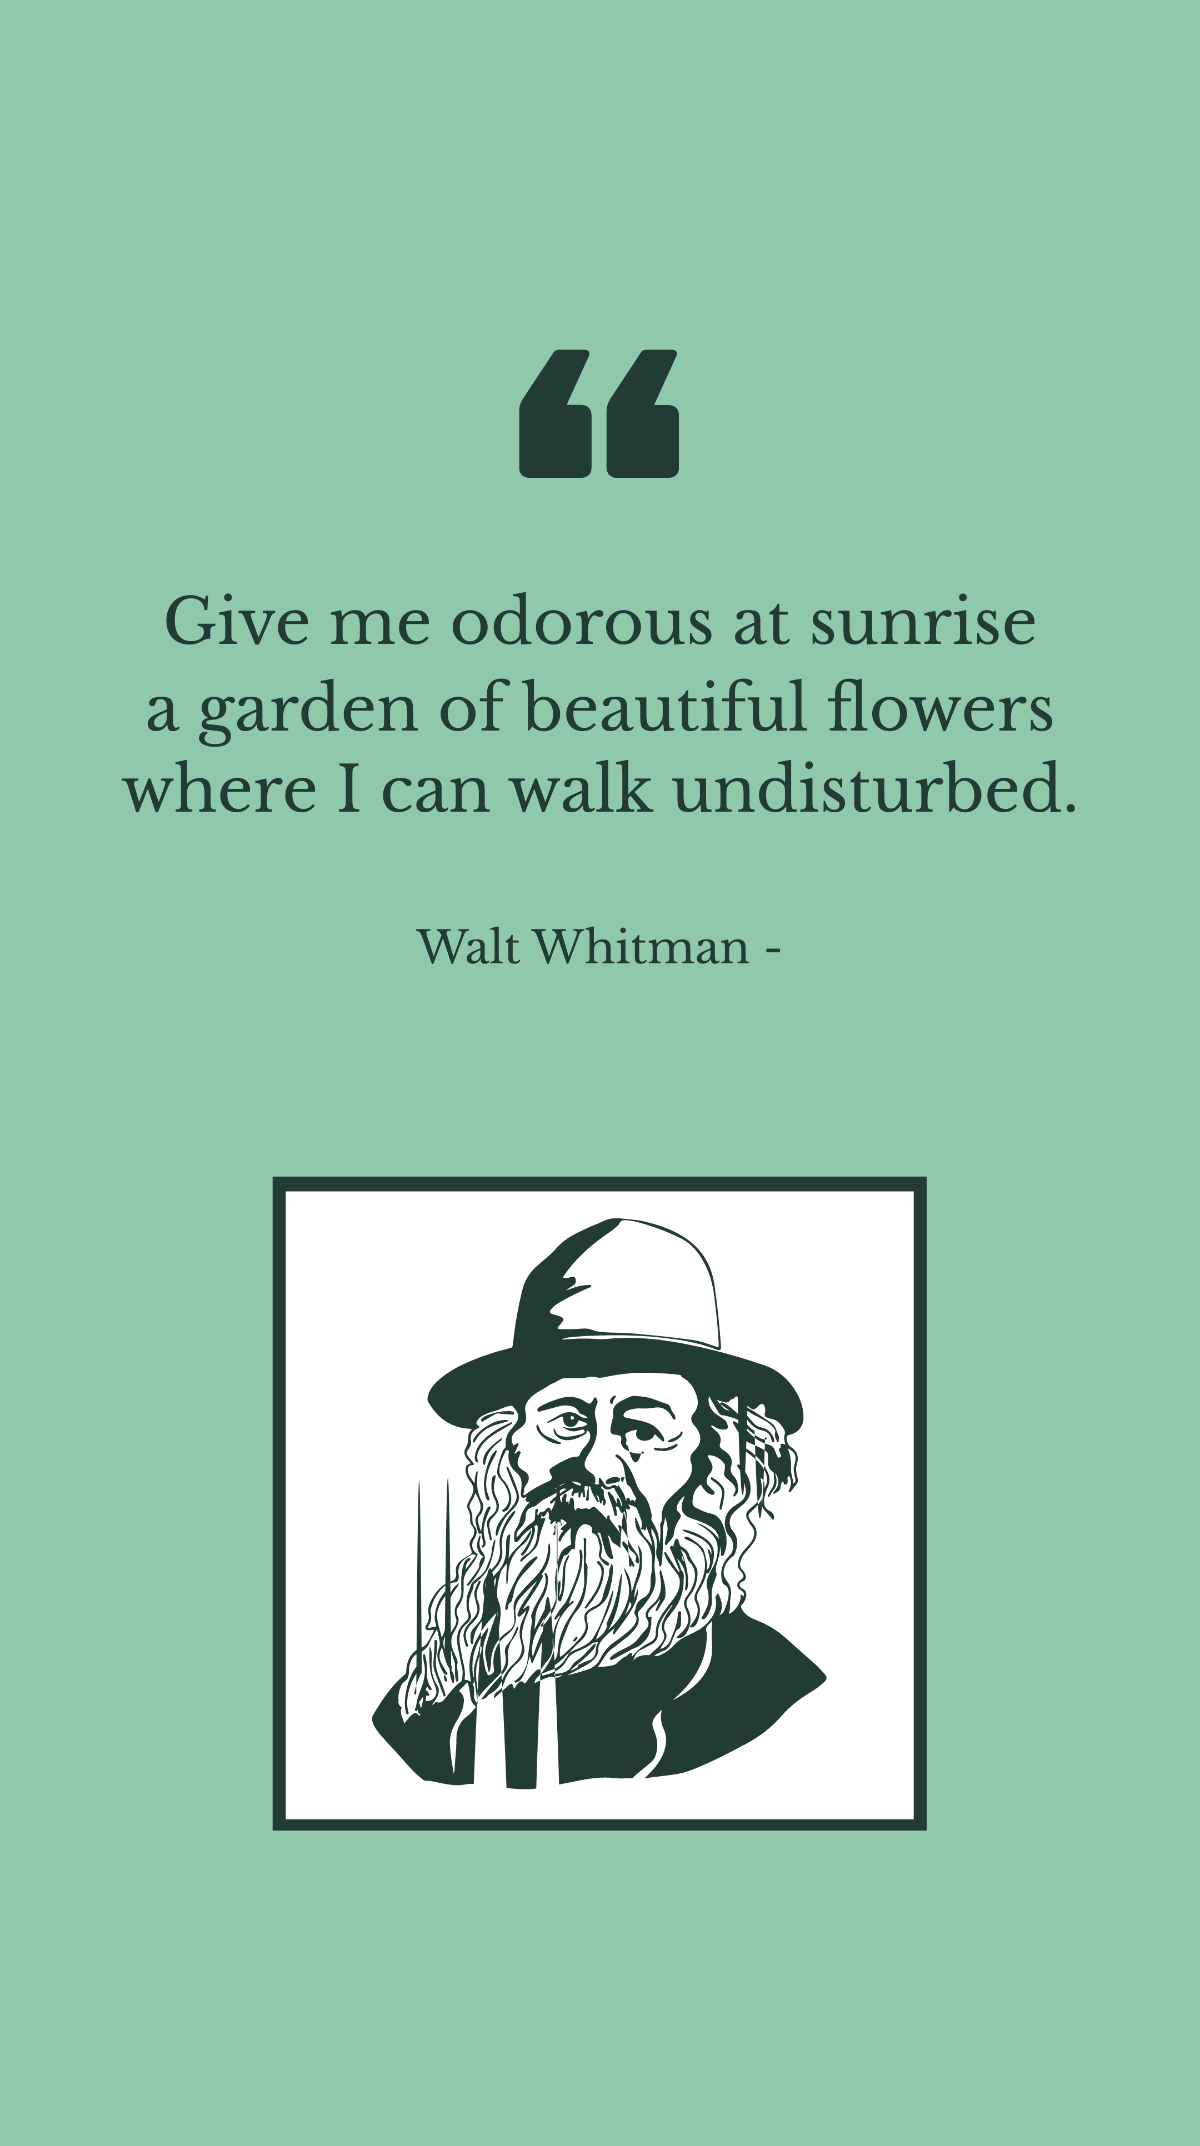 Walt Whitman - Give me odorous at sunrise a garden of beautiful flowers where I can walk undisturbed.